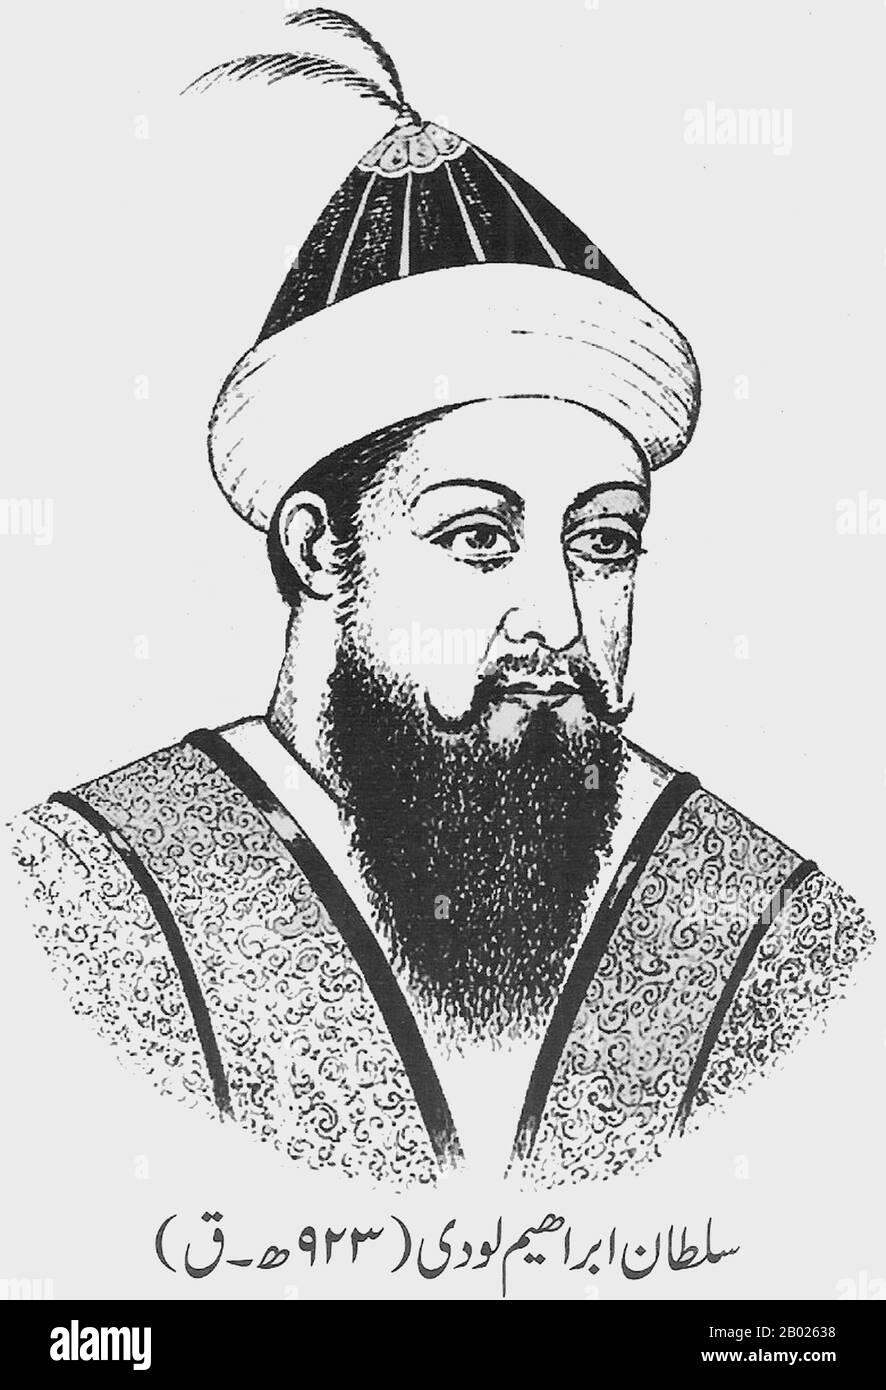 Ibrahim Lodi (Pashto: ابراهیم لودي, Hindi: इब्राहिम लोधी) (b. ? – April 21, 1526) was the Sultan of Delhi in 1526 after the death of his father Sikandar. He became the last ruler of the Lodi dynasty, reigning for nine years between 1517 until being defeated and killed by Babur's invading army in 1526 Stock Photo